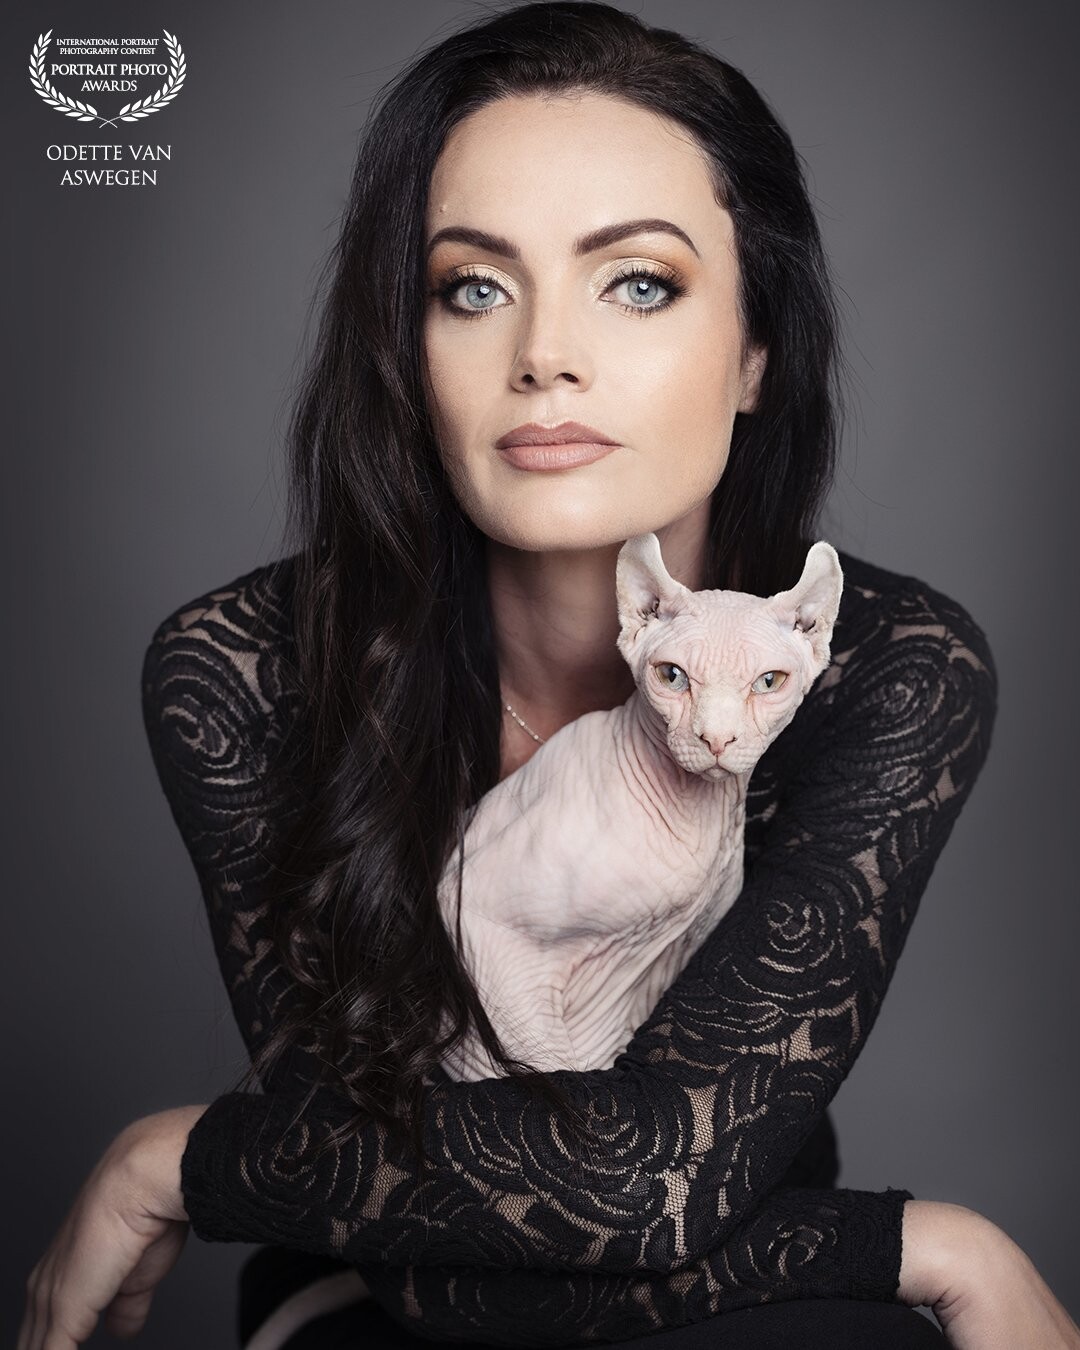 This was such a fun session with Lily and Mariska in my studio - this cat took over. We managed to get her one portrait with both looking just perfect. I love including animals into portrait sessions. Shot with CanonR5 and Profoto B1x.